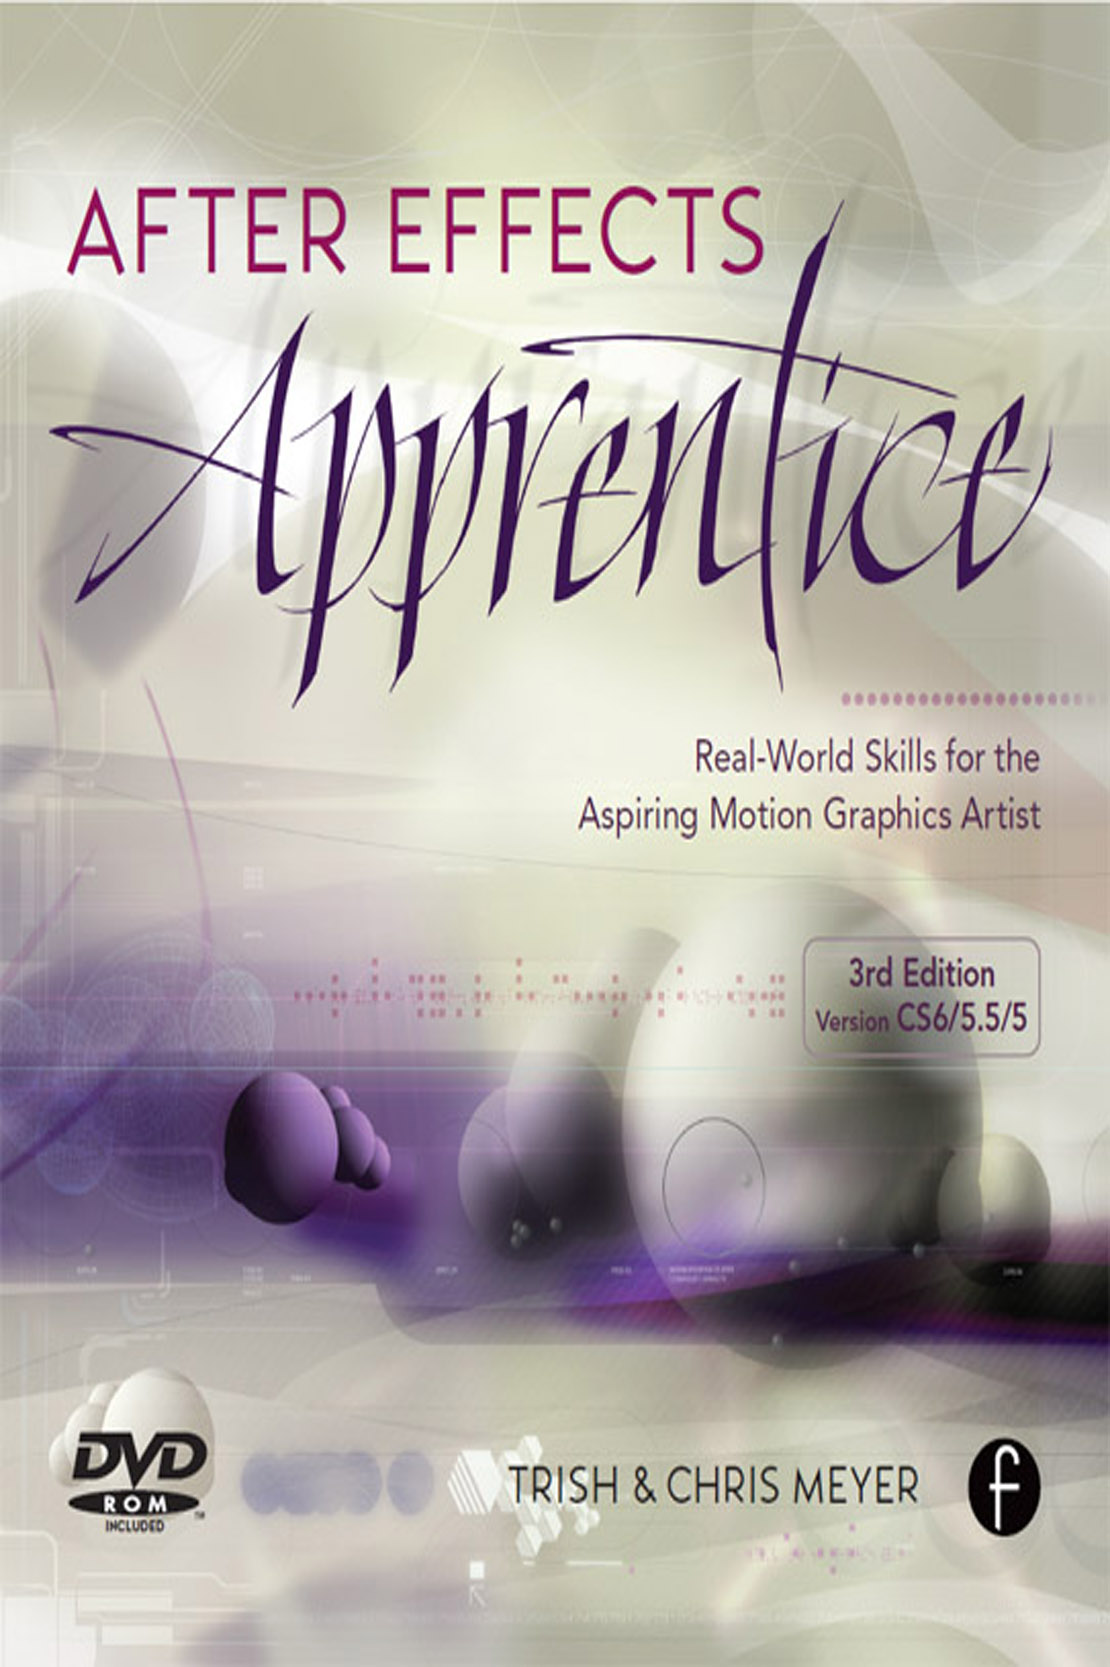 after effects apprentice 3rd edition pdf download